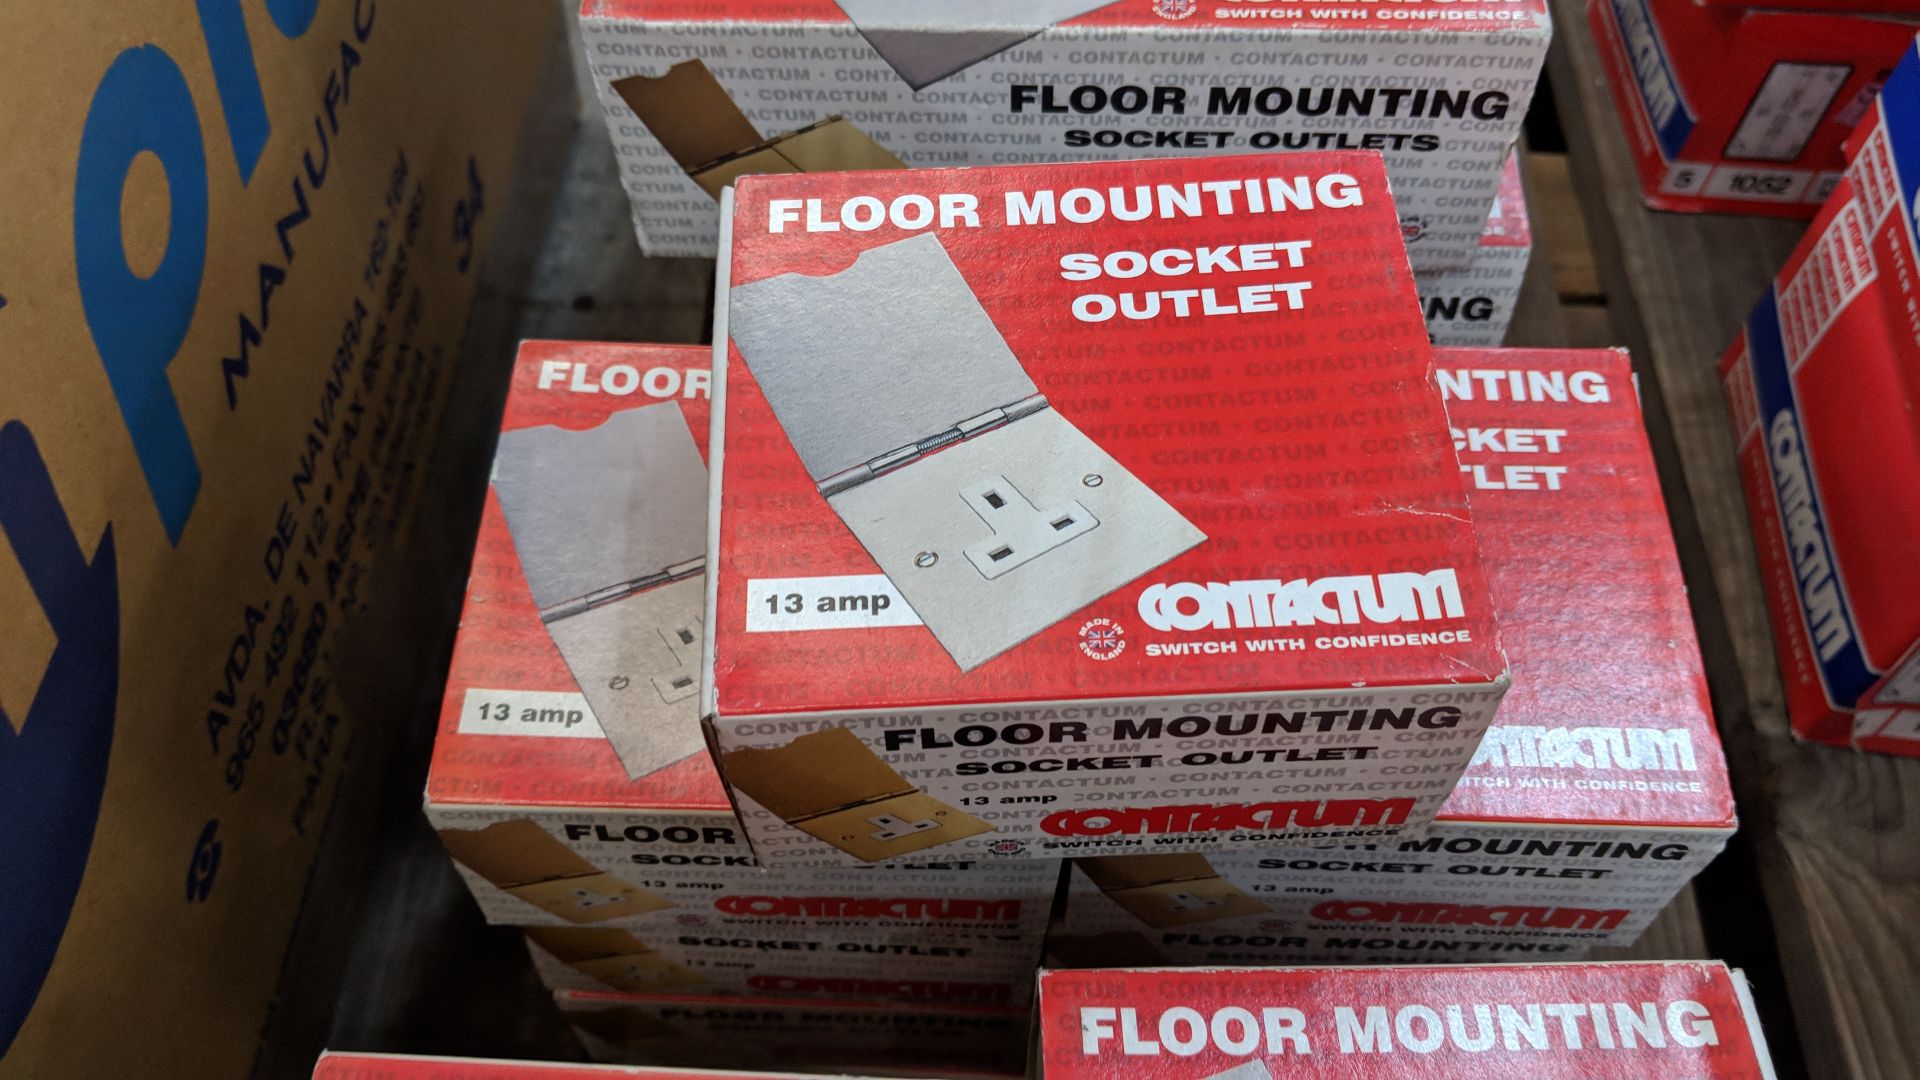 22 assorted boxes of Contactum floor mounting socket outlet product The vast majority of products in - Image 3 of 4